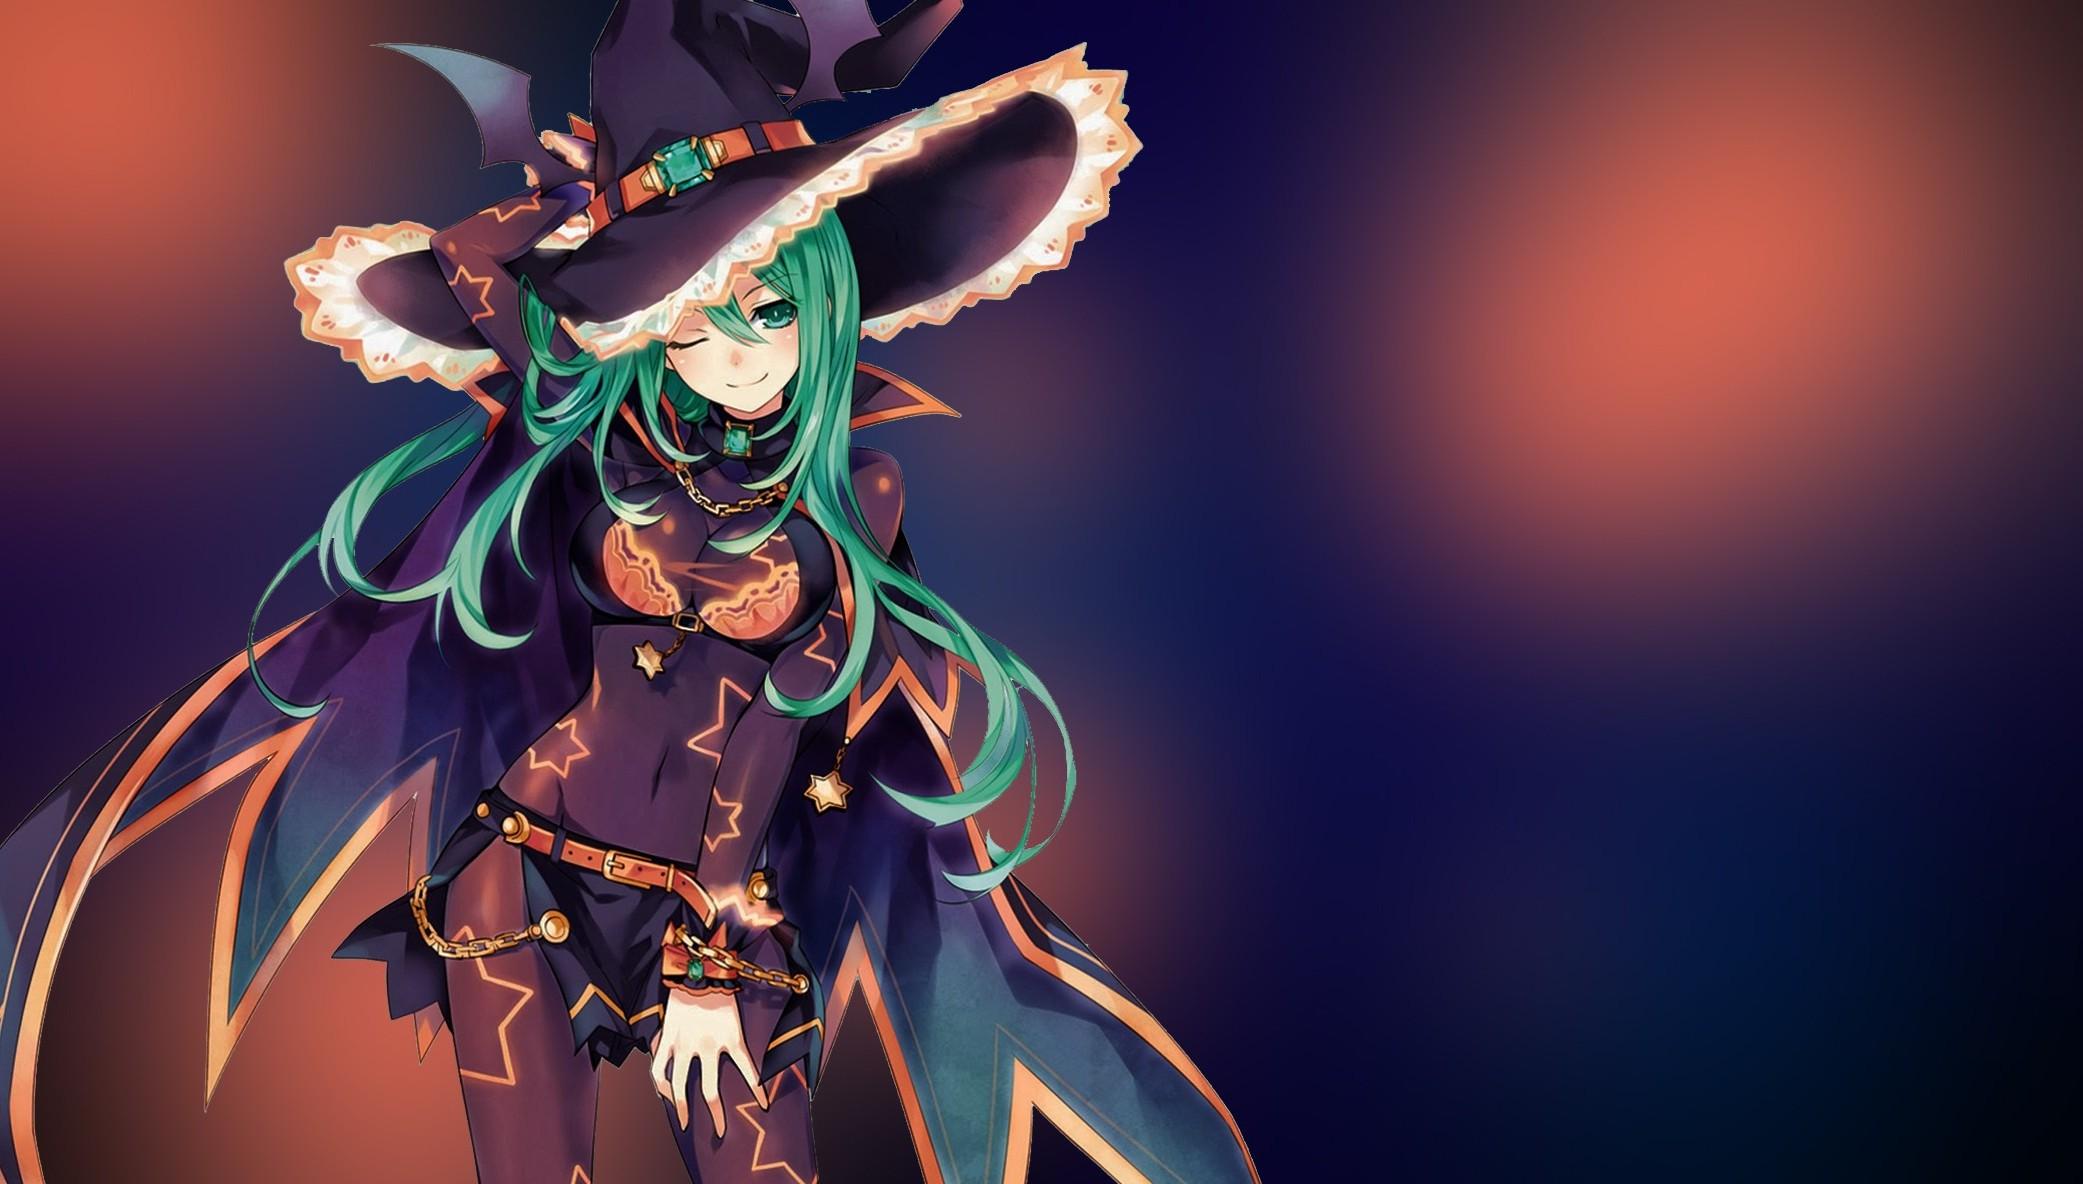 Cute Witch - Other & Anime Background Wallpapers on Desktop Nexus (Image  2187232)